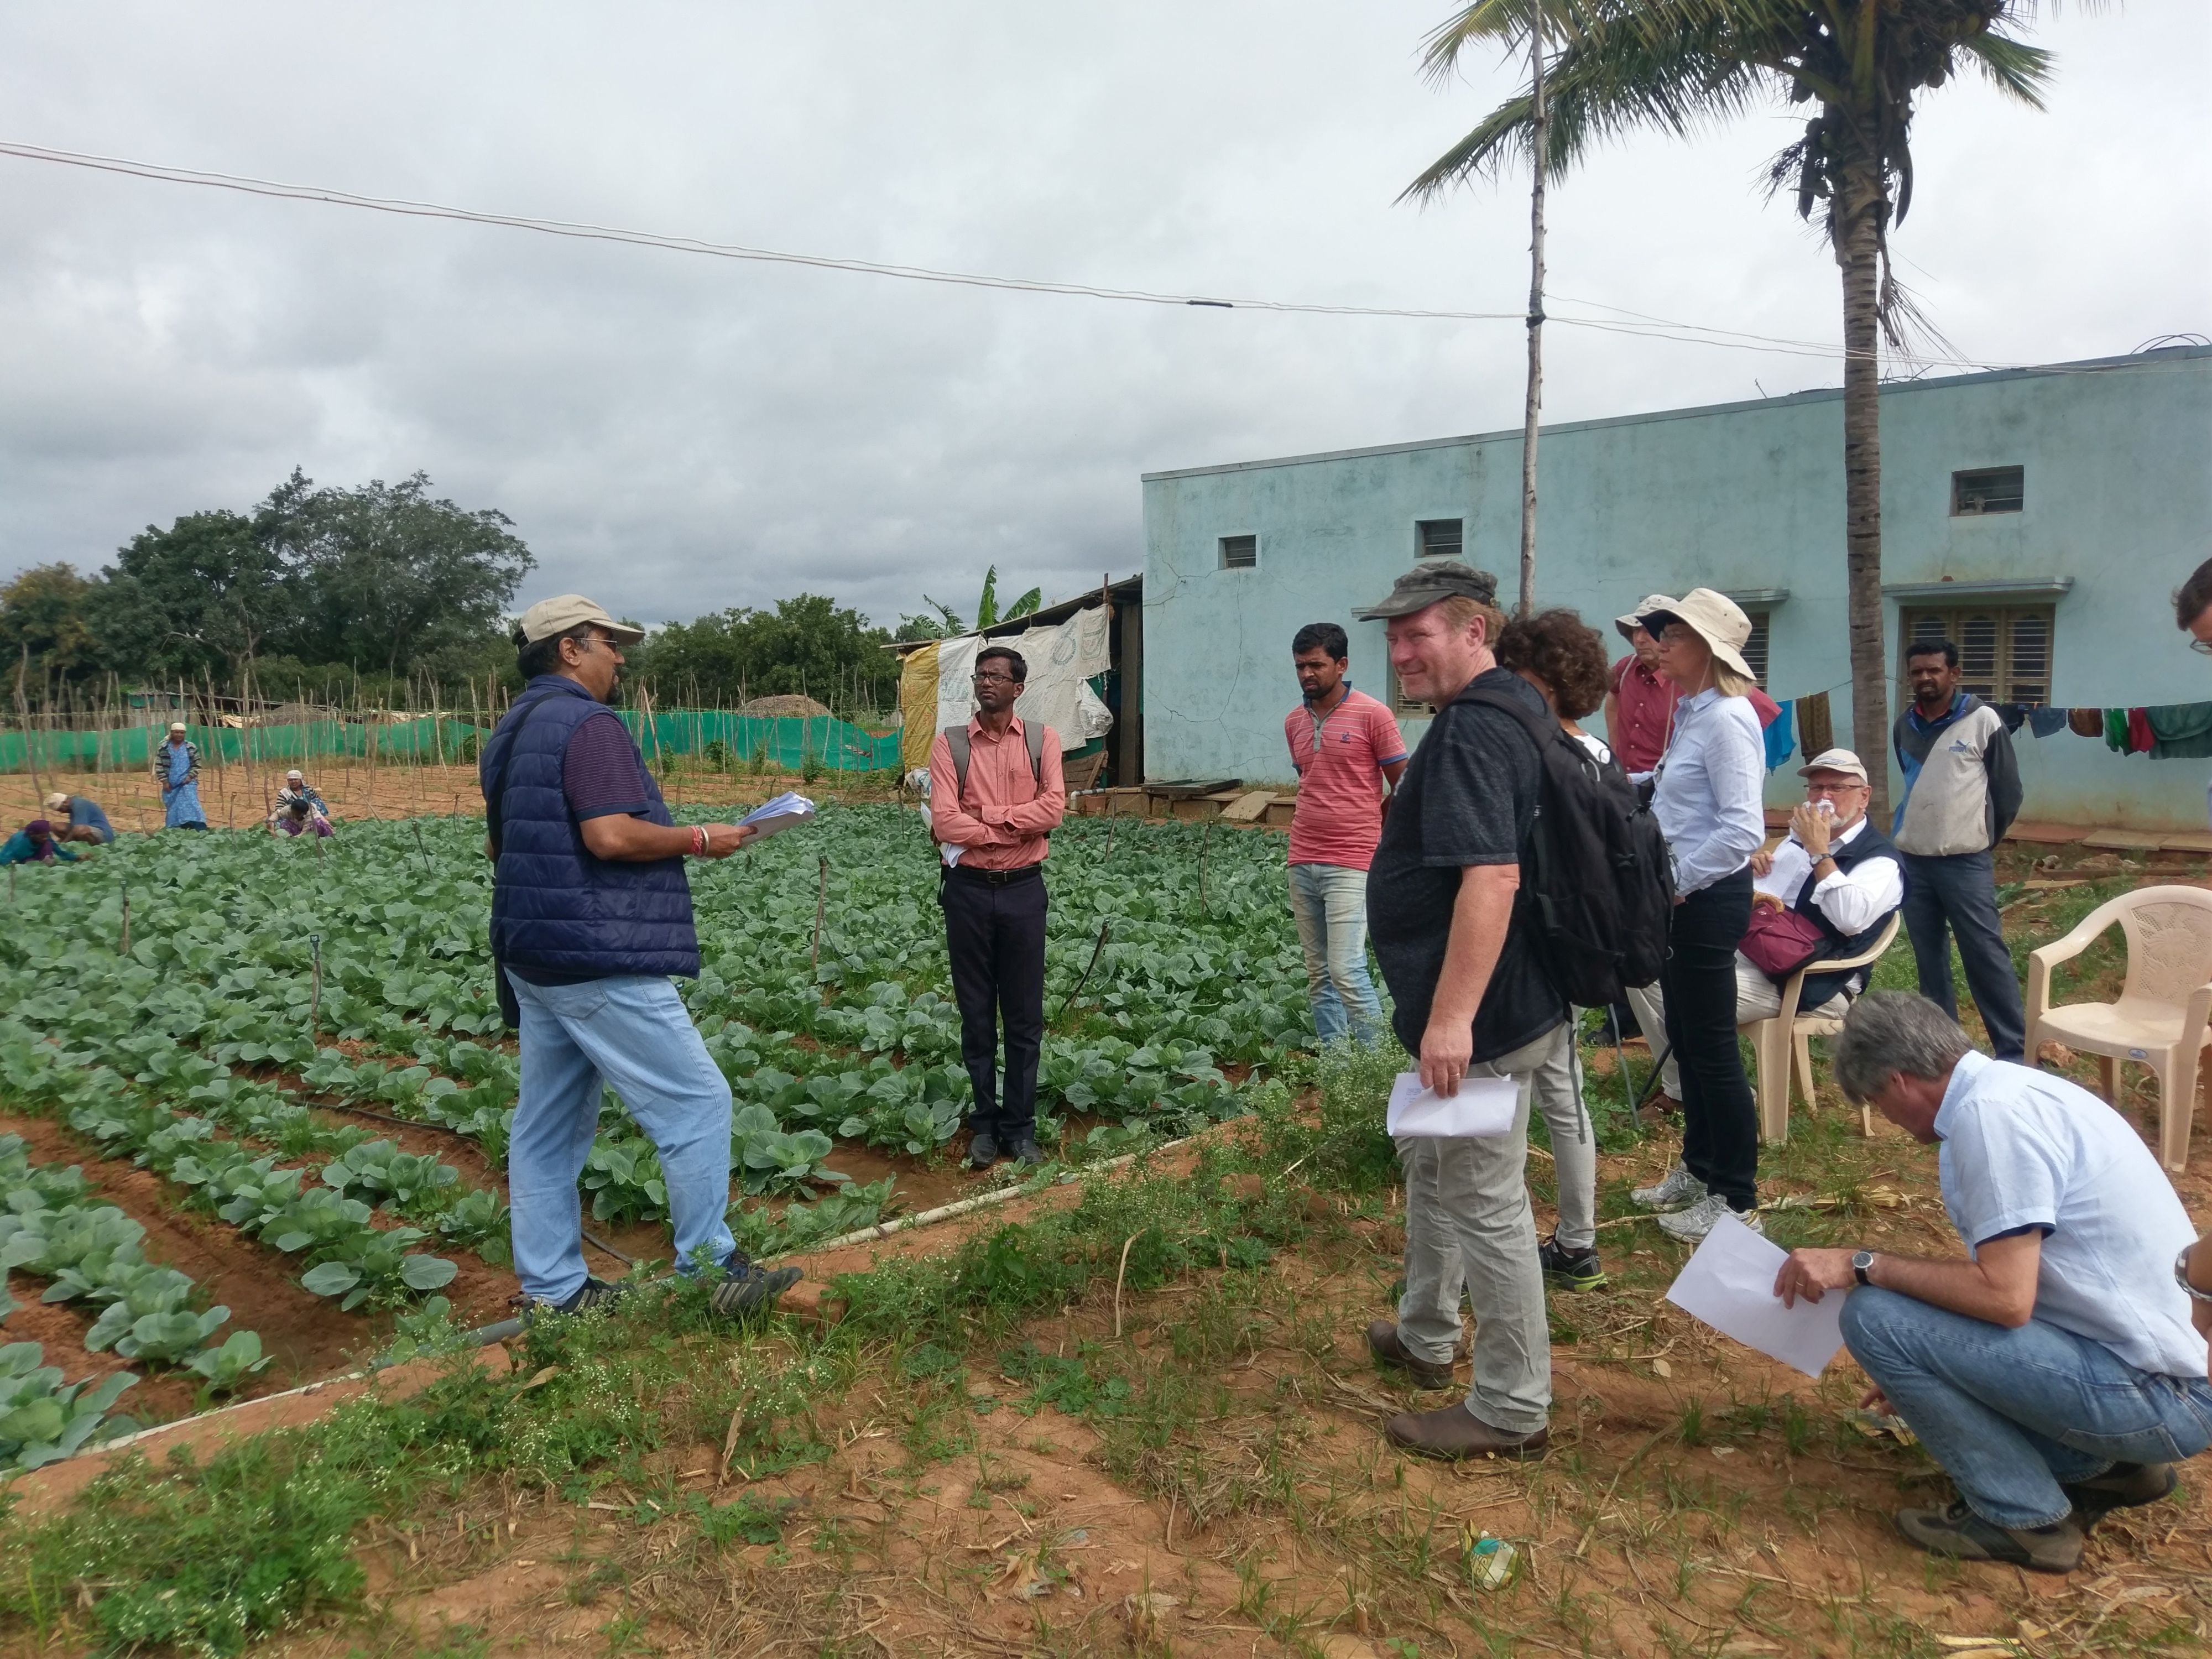 Visit to a farmer in Gandarajapura in the course of the intermediate evaluation of FOR2432 in August 2018. Prof. Sunil Nautiyal (left) explains farmers’ management practices to the group of evaluators: Prof. G. Guggenberger, Prof. C.C. Schön, Prof. M. Kirk, Prof. M. Becker; farmers and fieldworkers in the background.